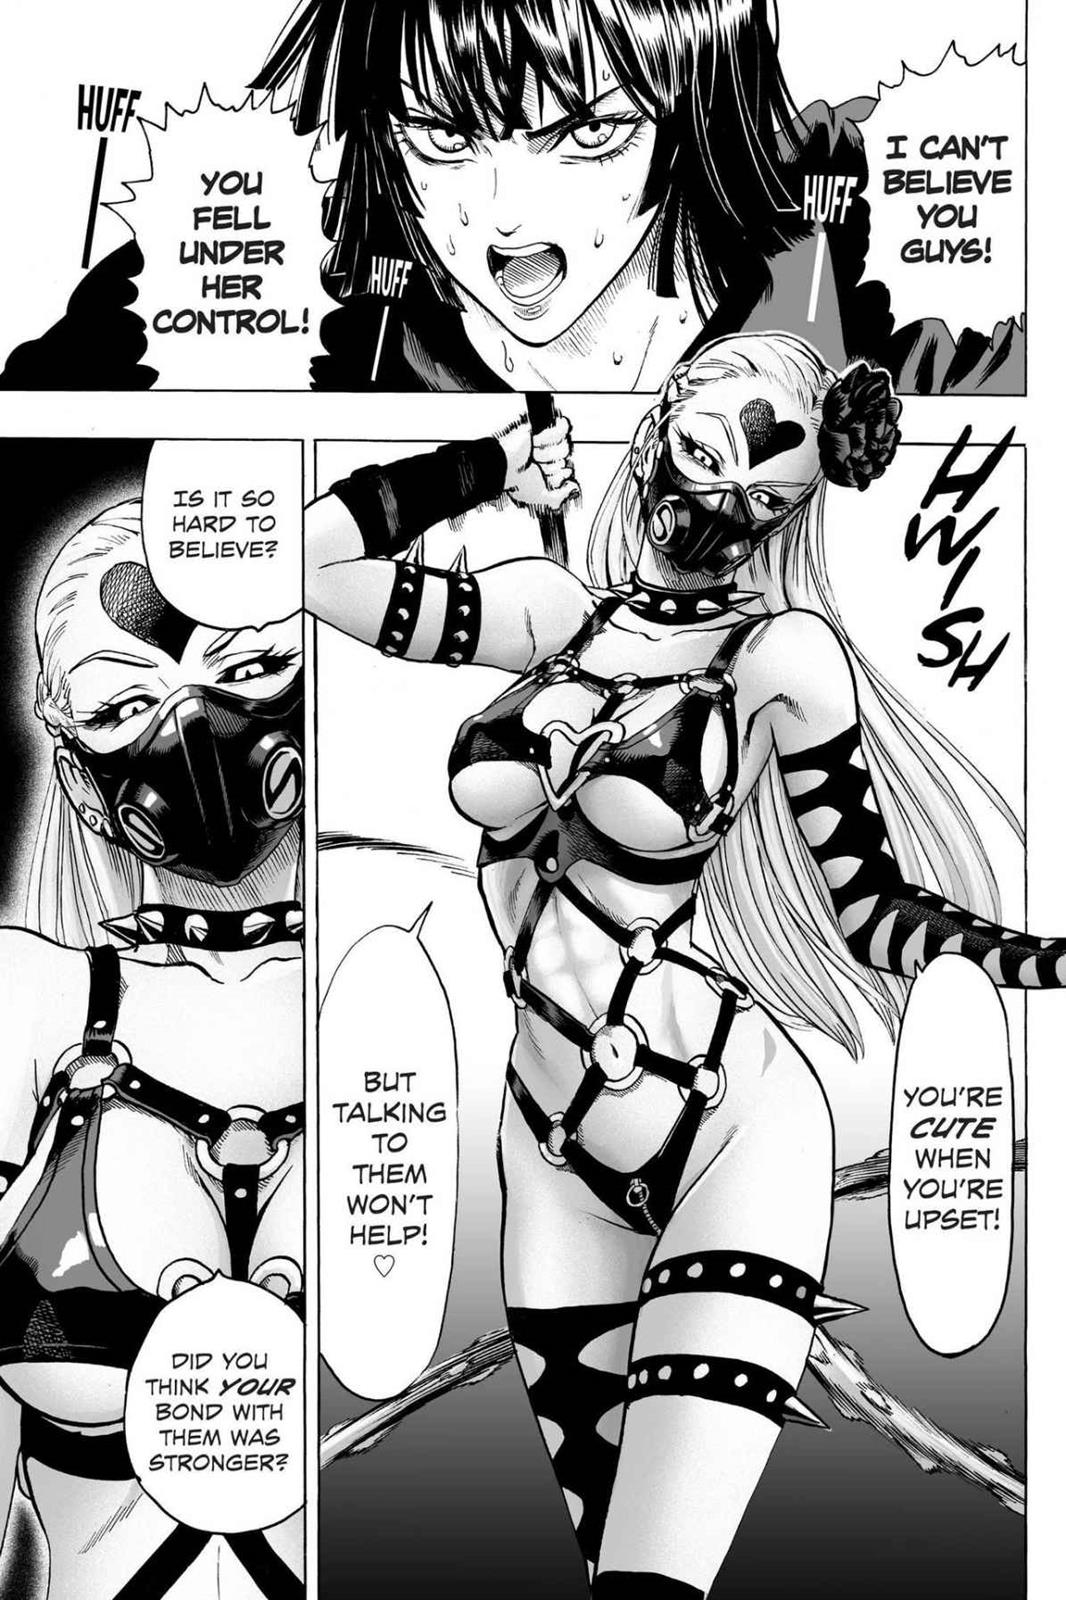 One-Punch Man, Punch 64 image 28